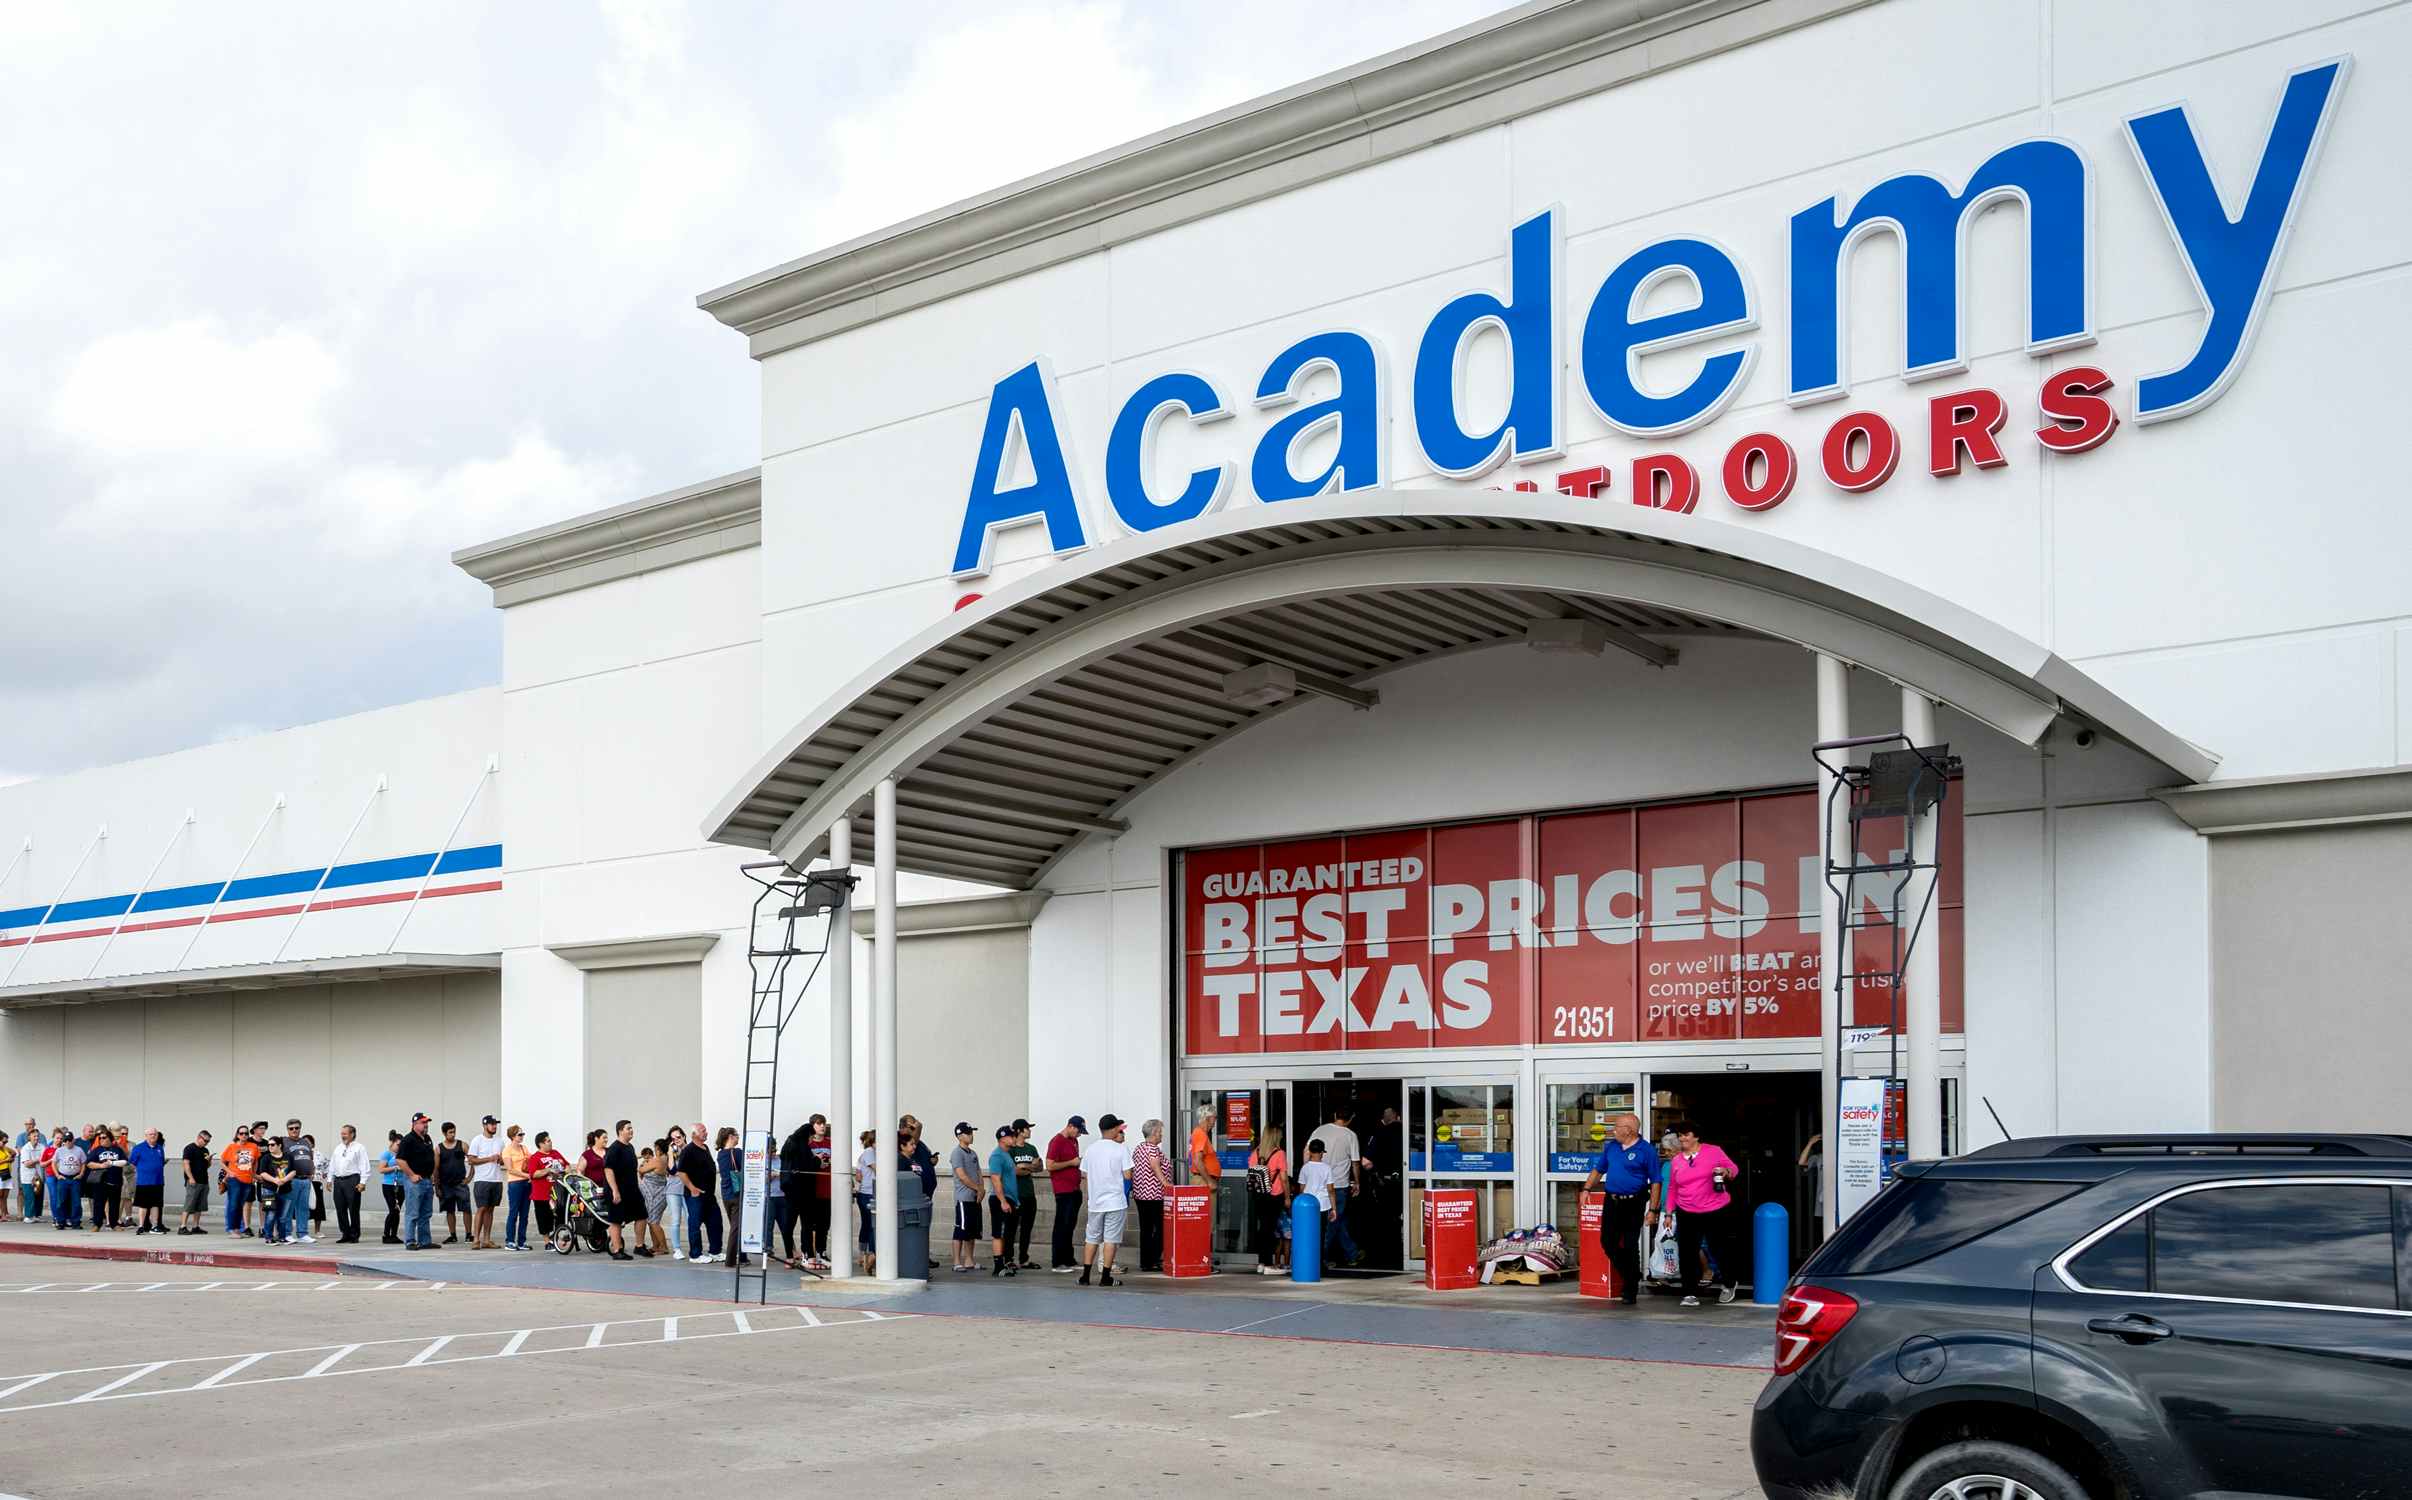 Academy Sports + Outdoors storefront with line